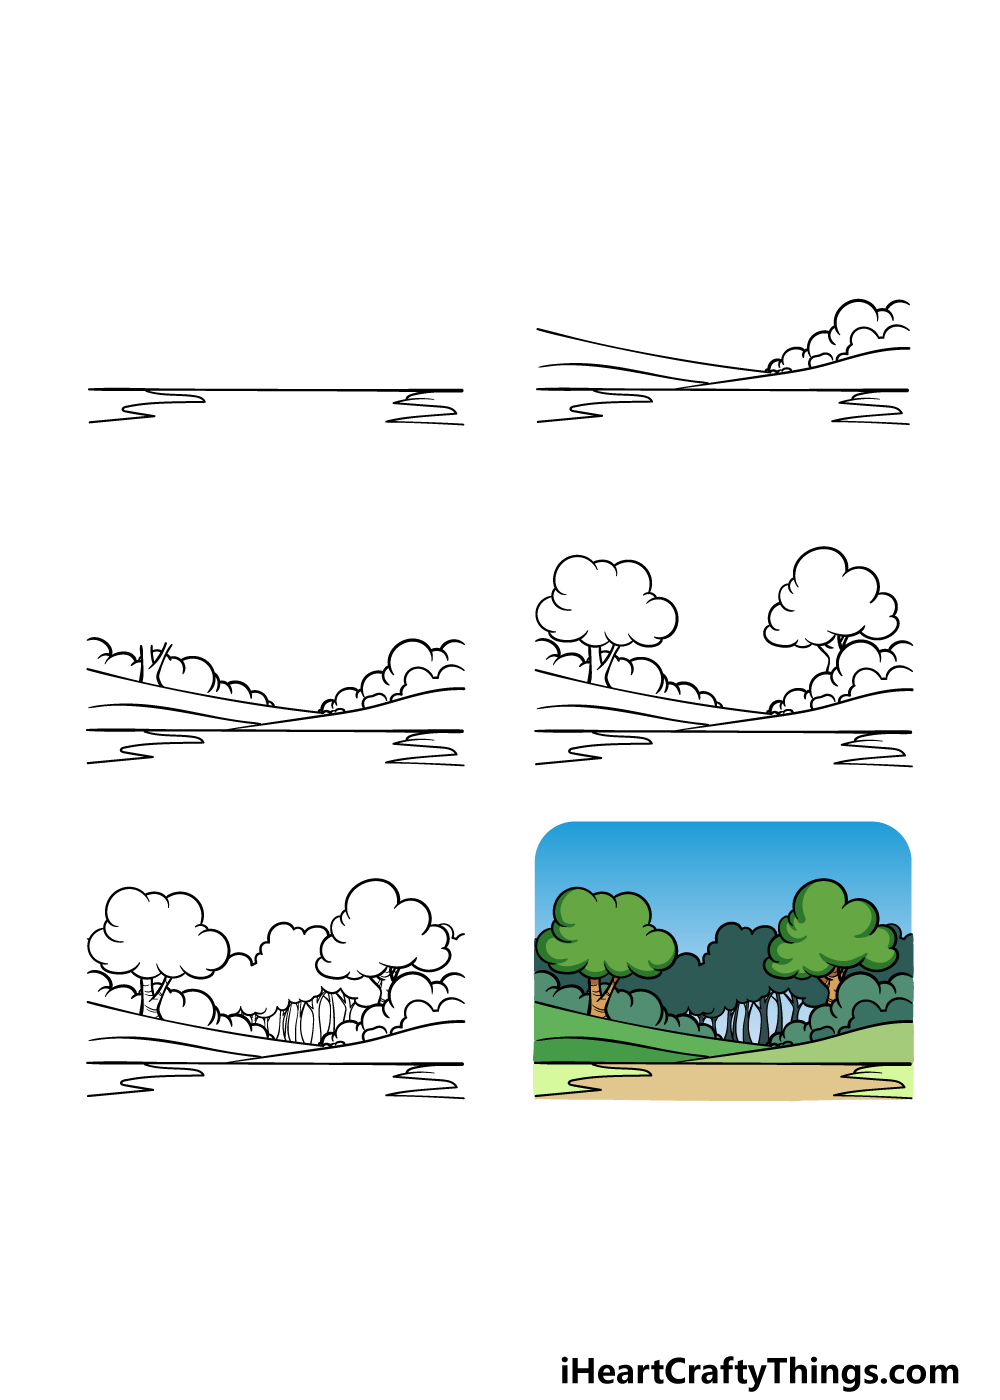 how to draw a Simple Landscape in 6 steps